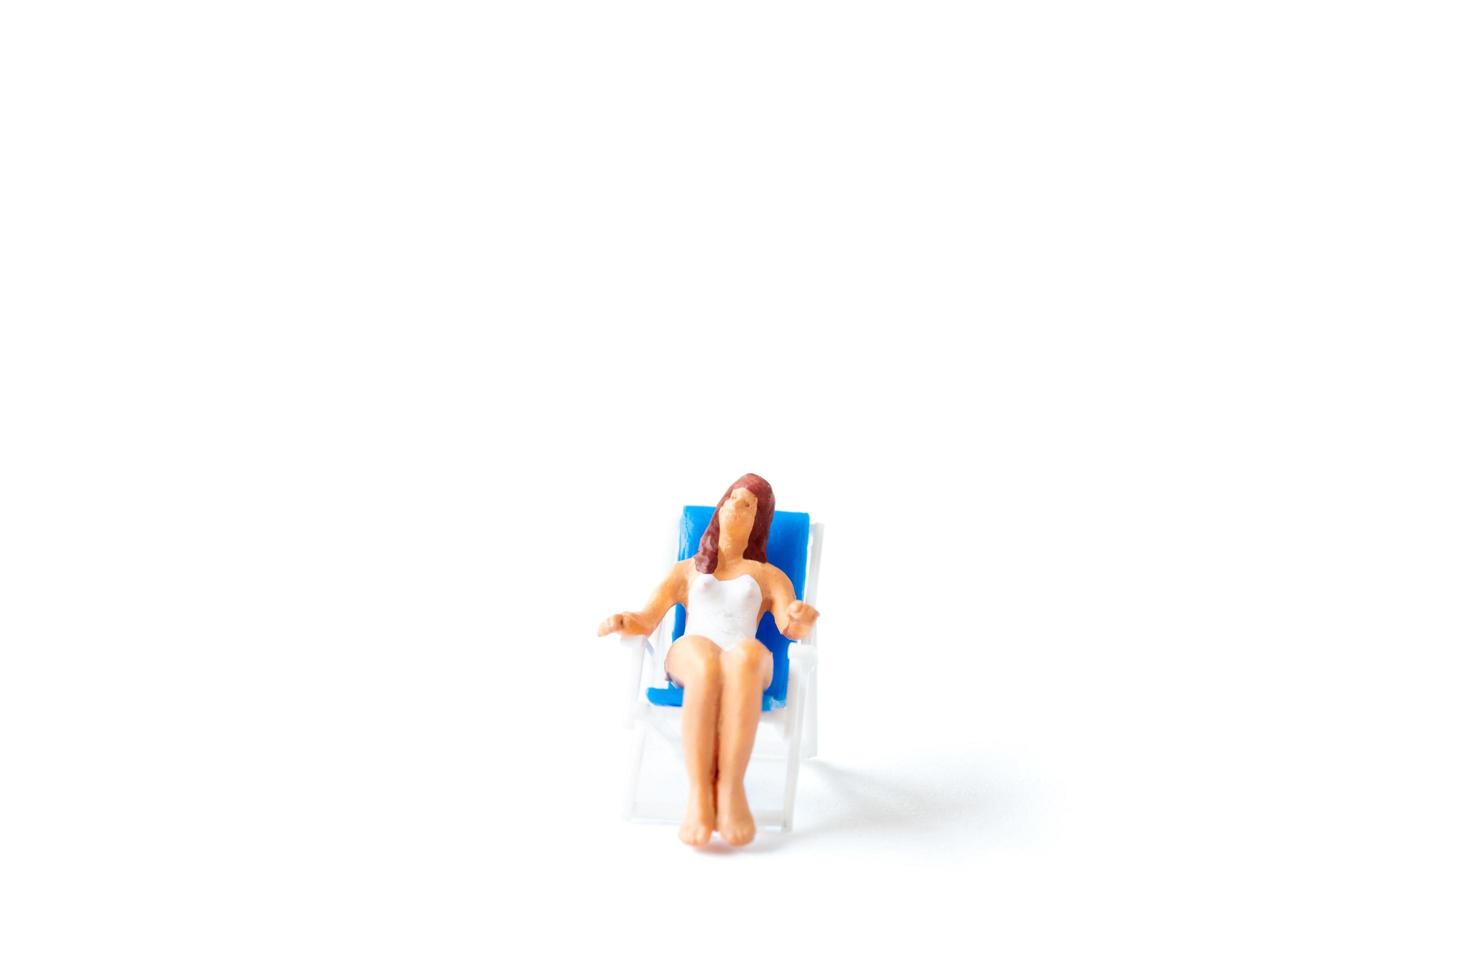 Miniature person sunbathing on a deck chair on a white background, summertime concept photo